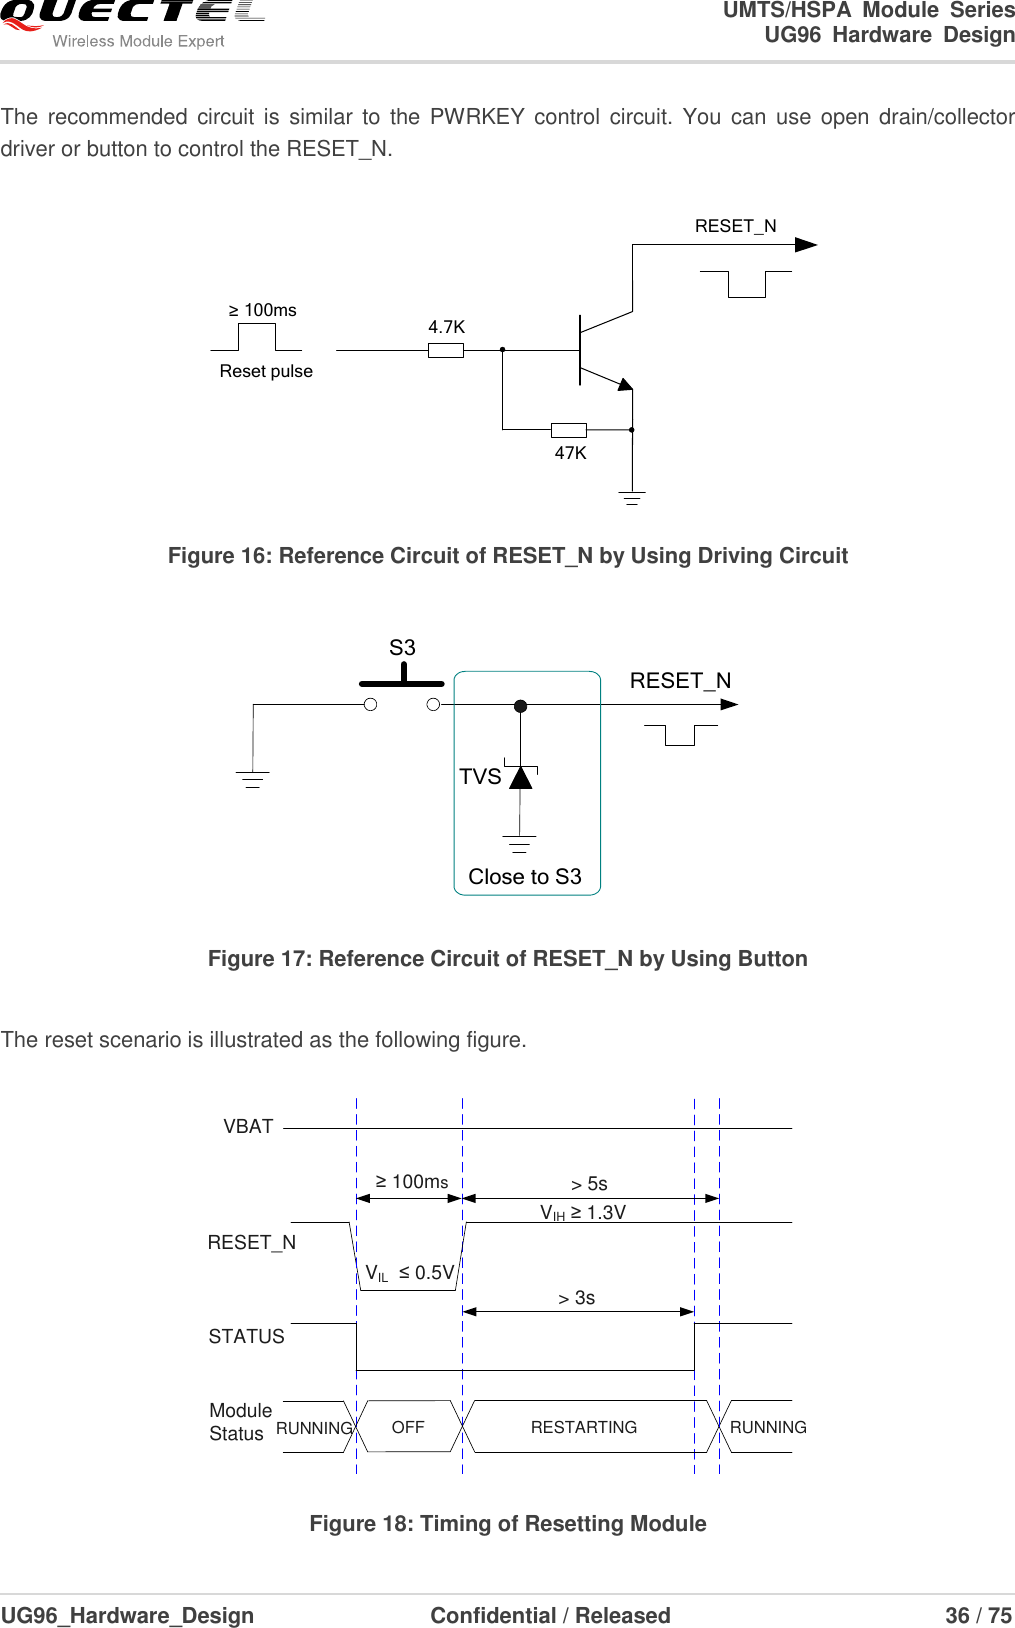                                                                        UMTS/HSPA  Module  Series                                                                 UG96  Hardware  Design  UG96_Hardware_Design                  Confidential / Released                             36 / 75    The  recommended circuit is  similar to  the PWRKEY  control circuit. You  can use  open drain/collector driver or button to control the RESET_N. Reset pulseRESET_N4.7K47K≥ 100ms Figure 16: Reference Circuit of RESET_N by Using Driving Circuit  RESET_NS3Close to S3TVS Figure 17: Reference Circuit of RESET_N by Using Button  The reset scenario is illustrated as the following figure.  VIL  ≤ 0.5VVIH ≥ 1.3VVBAT≥ 100msRESTARTINGModule      StatusRESET_NRUNNING&gt; 5sSTATUS&gt; 3sRUNNING OFF Figure 18: Timing of Resetting Module 